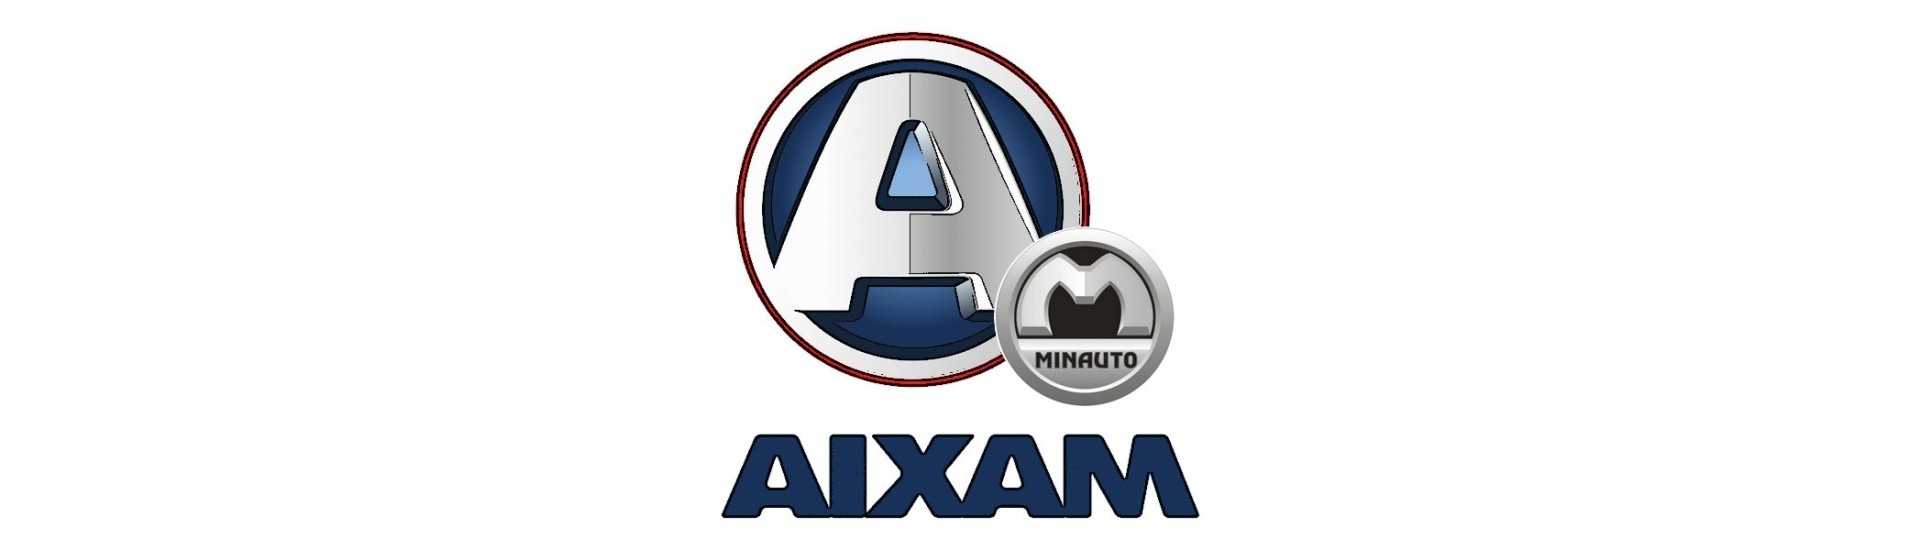 Suspension arm at the best car price without a permit Aixam Minauto